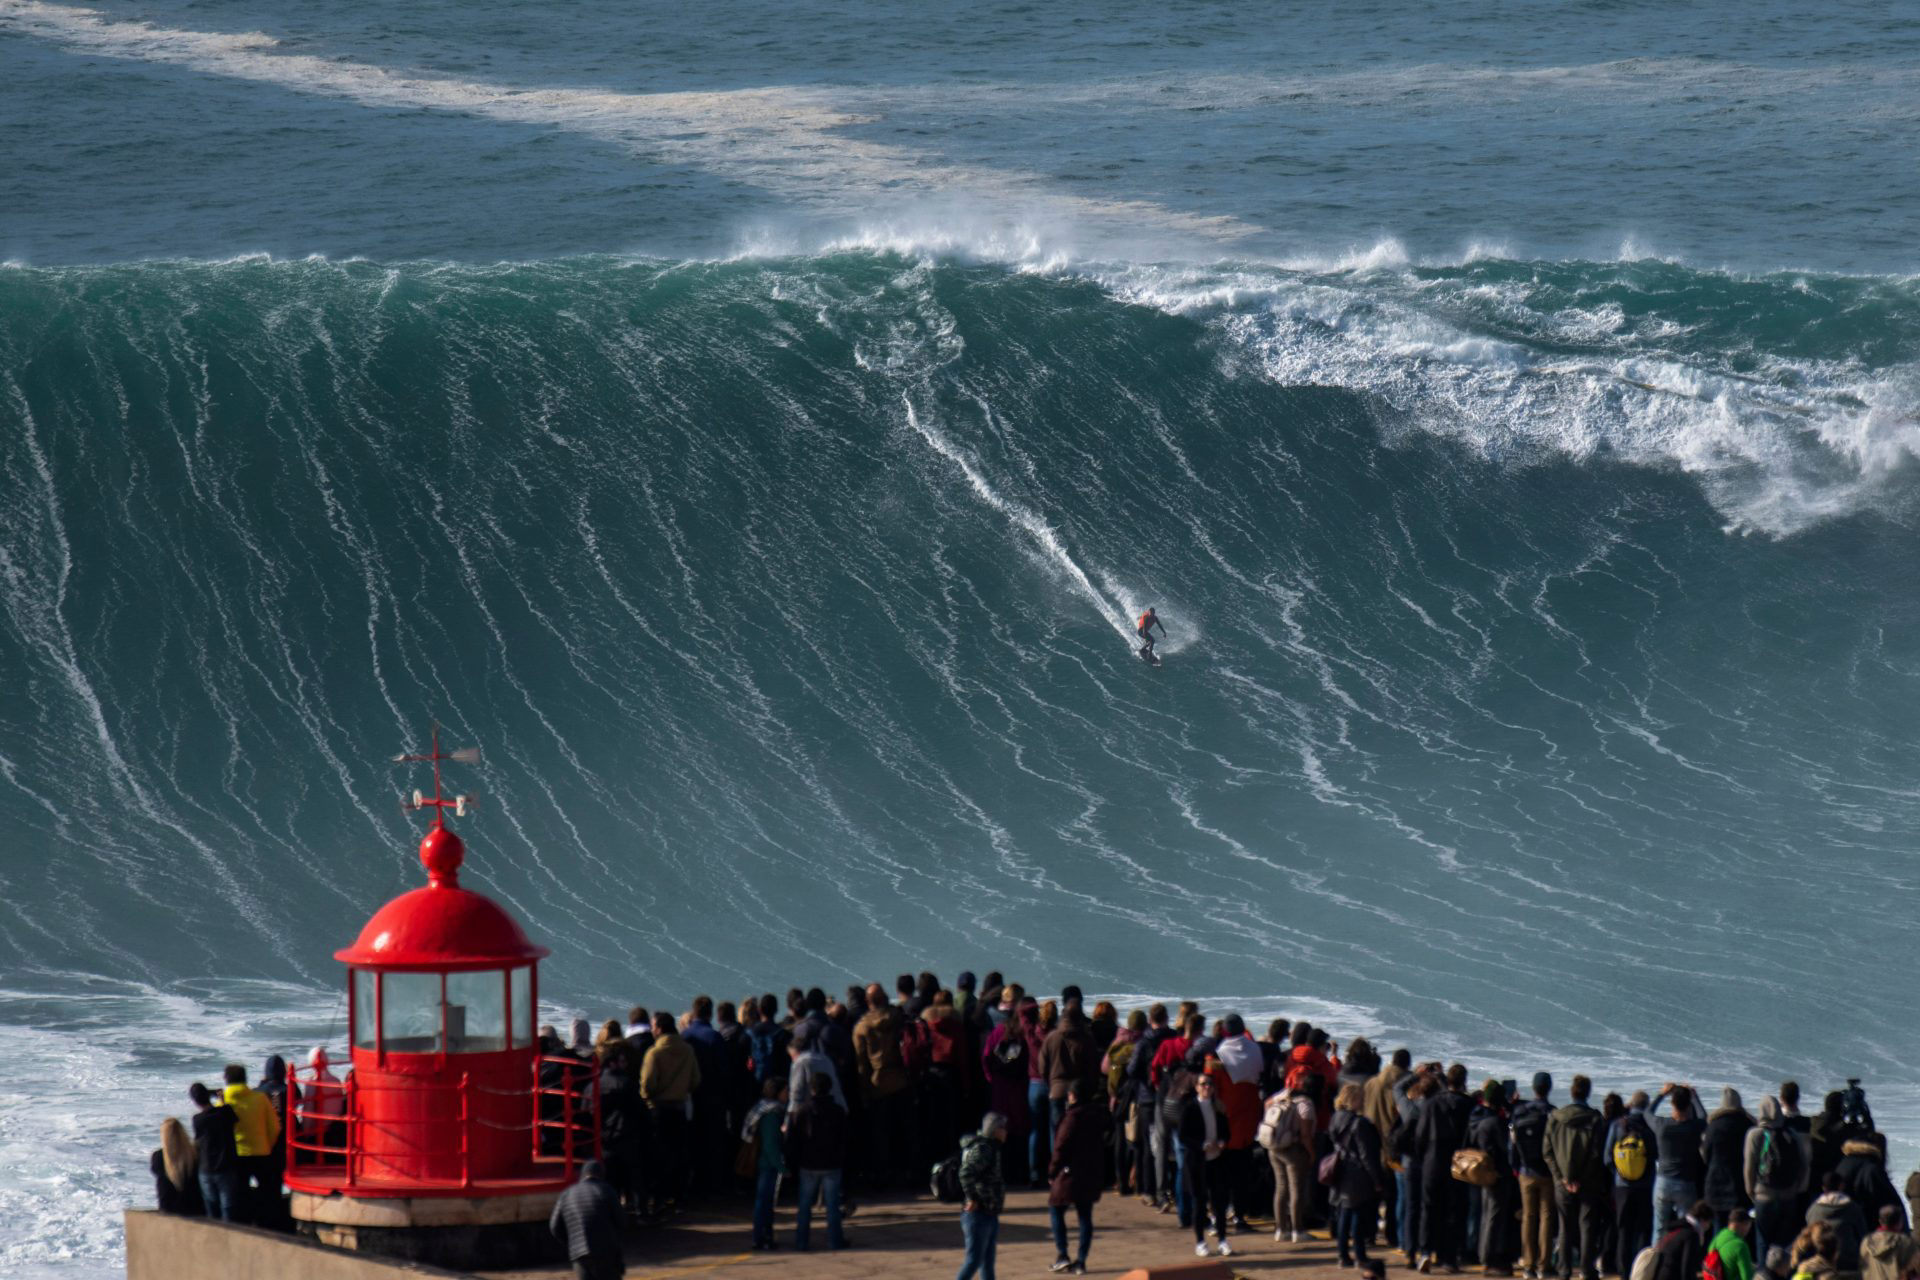 Riding Giants: What it feels like to take on the big waves at Nazaré